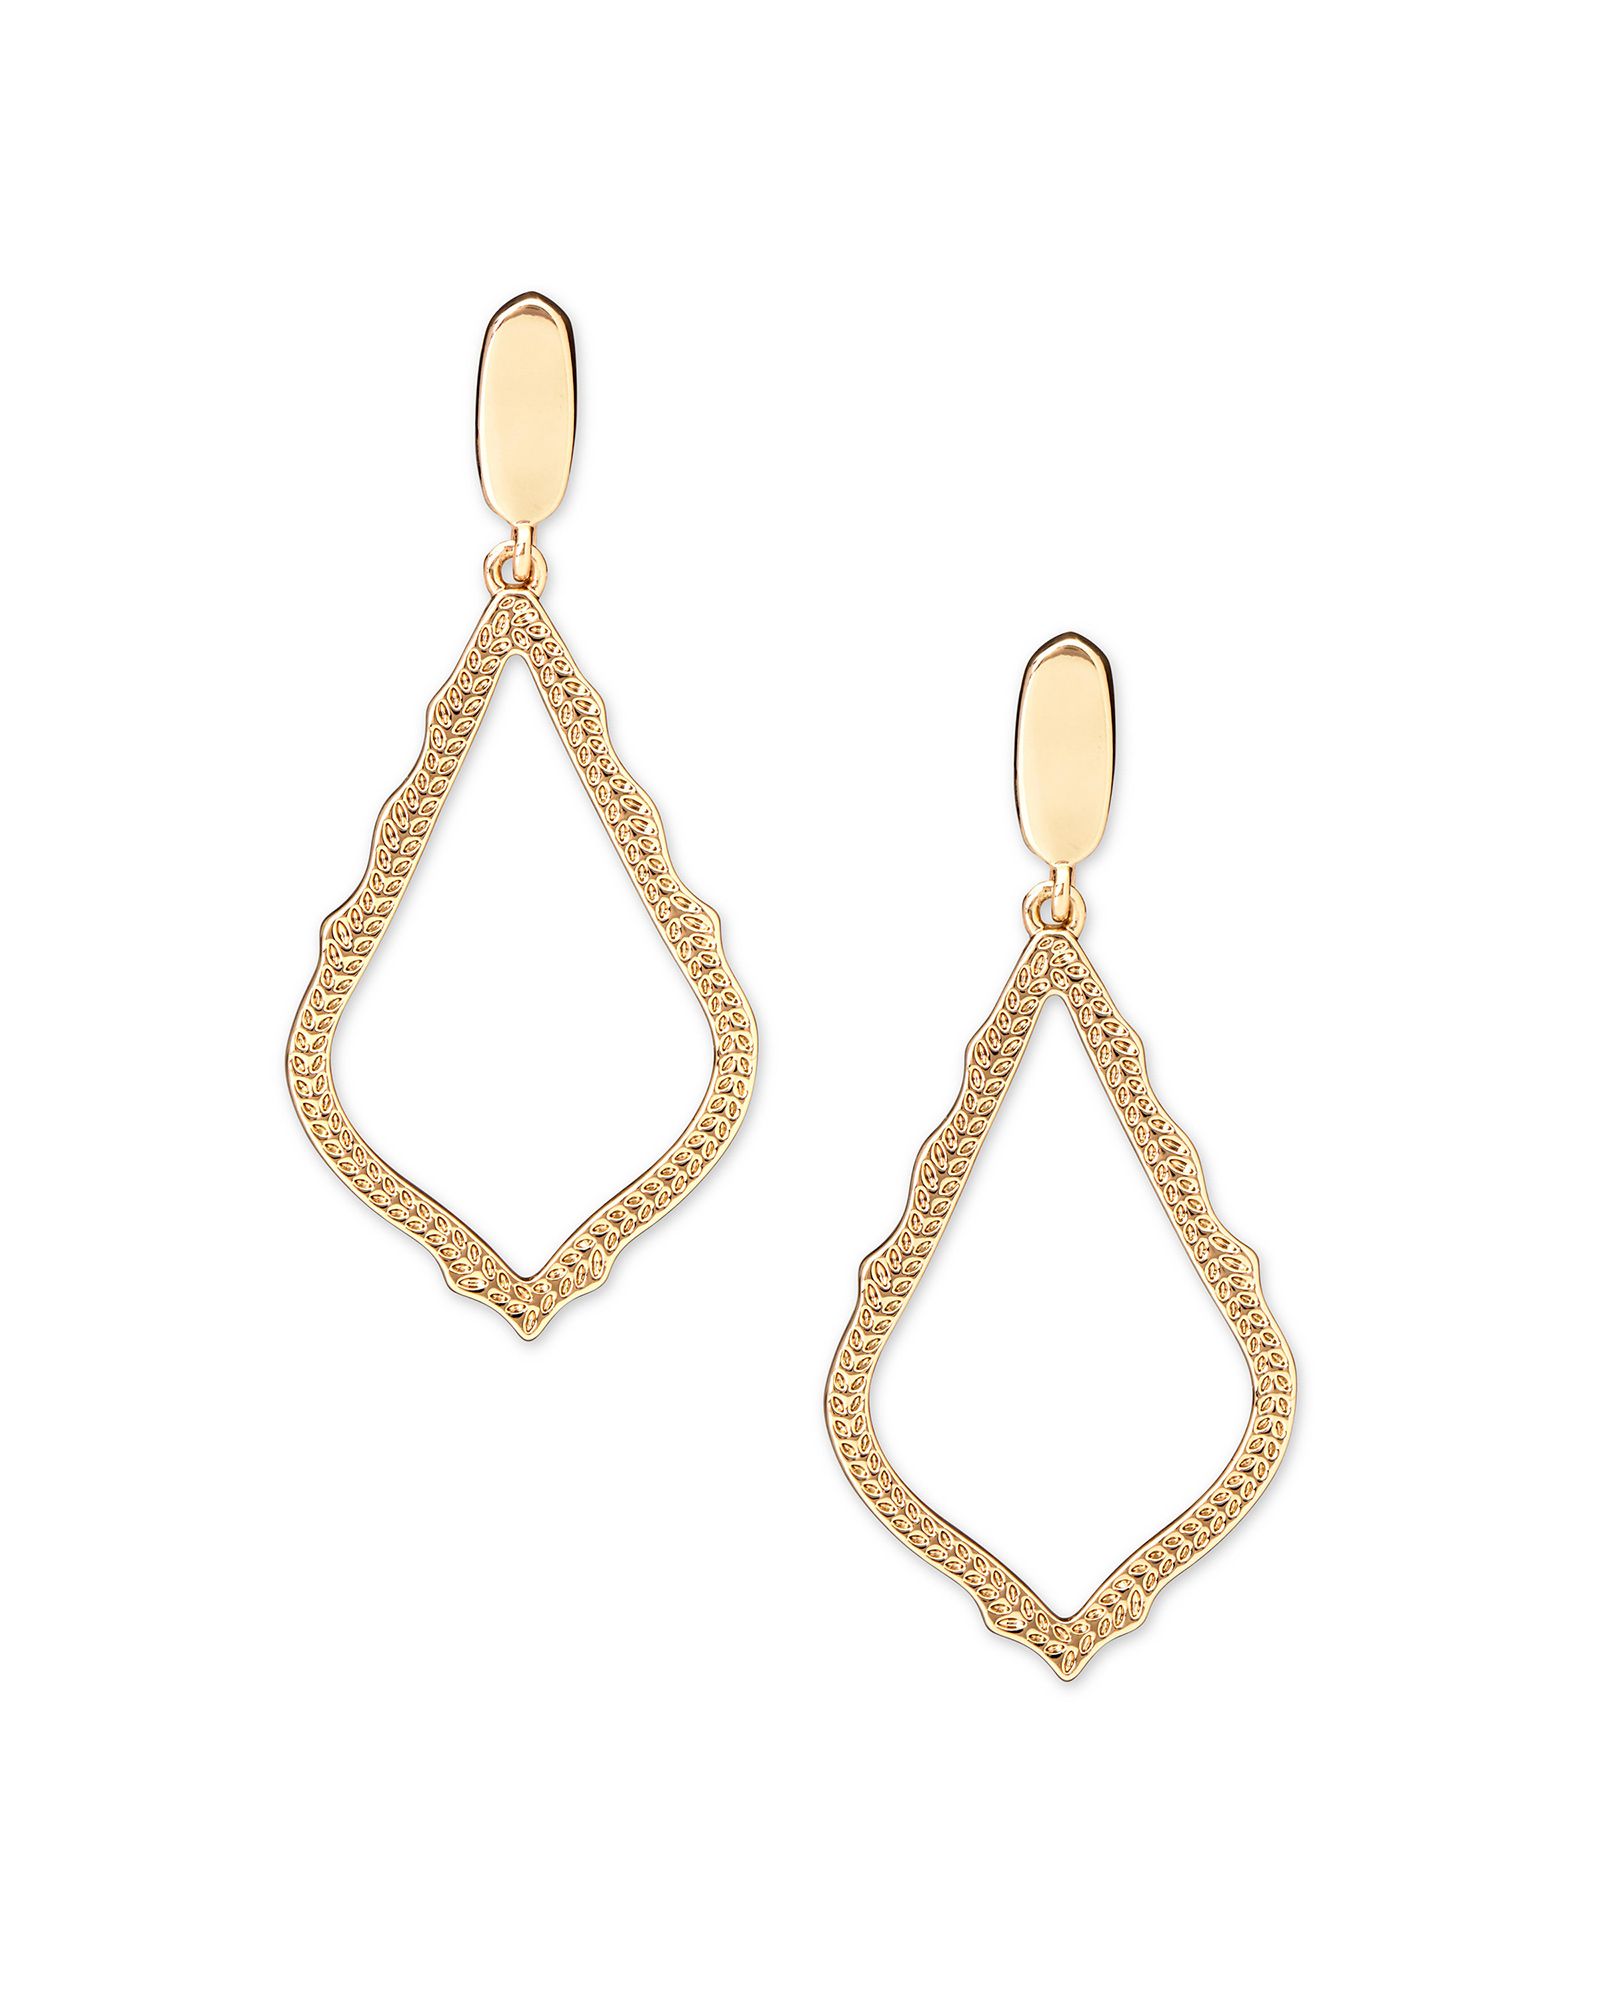 KENDRA SCOTT SOPHIA COLLECTION 14K YELLOW GOLD PLATED BRASS CLIP ON EARRINGS